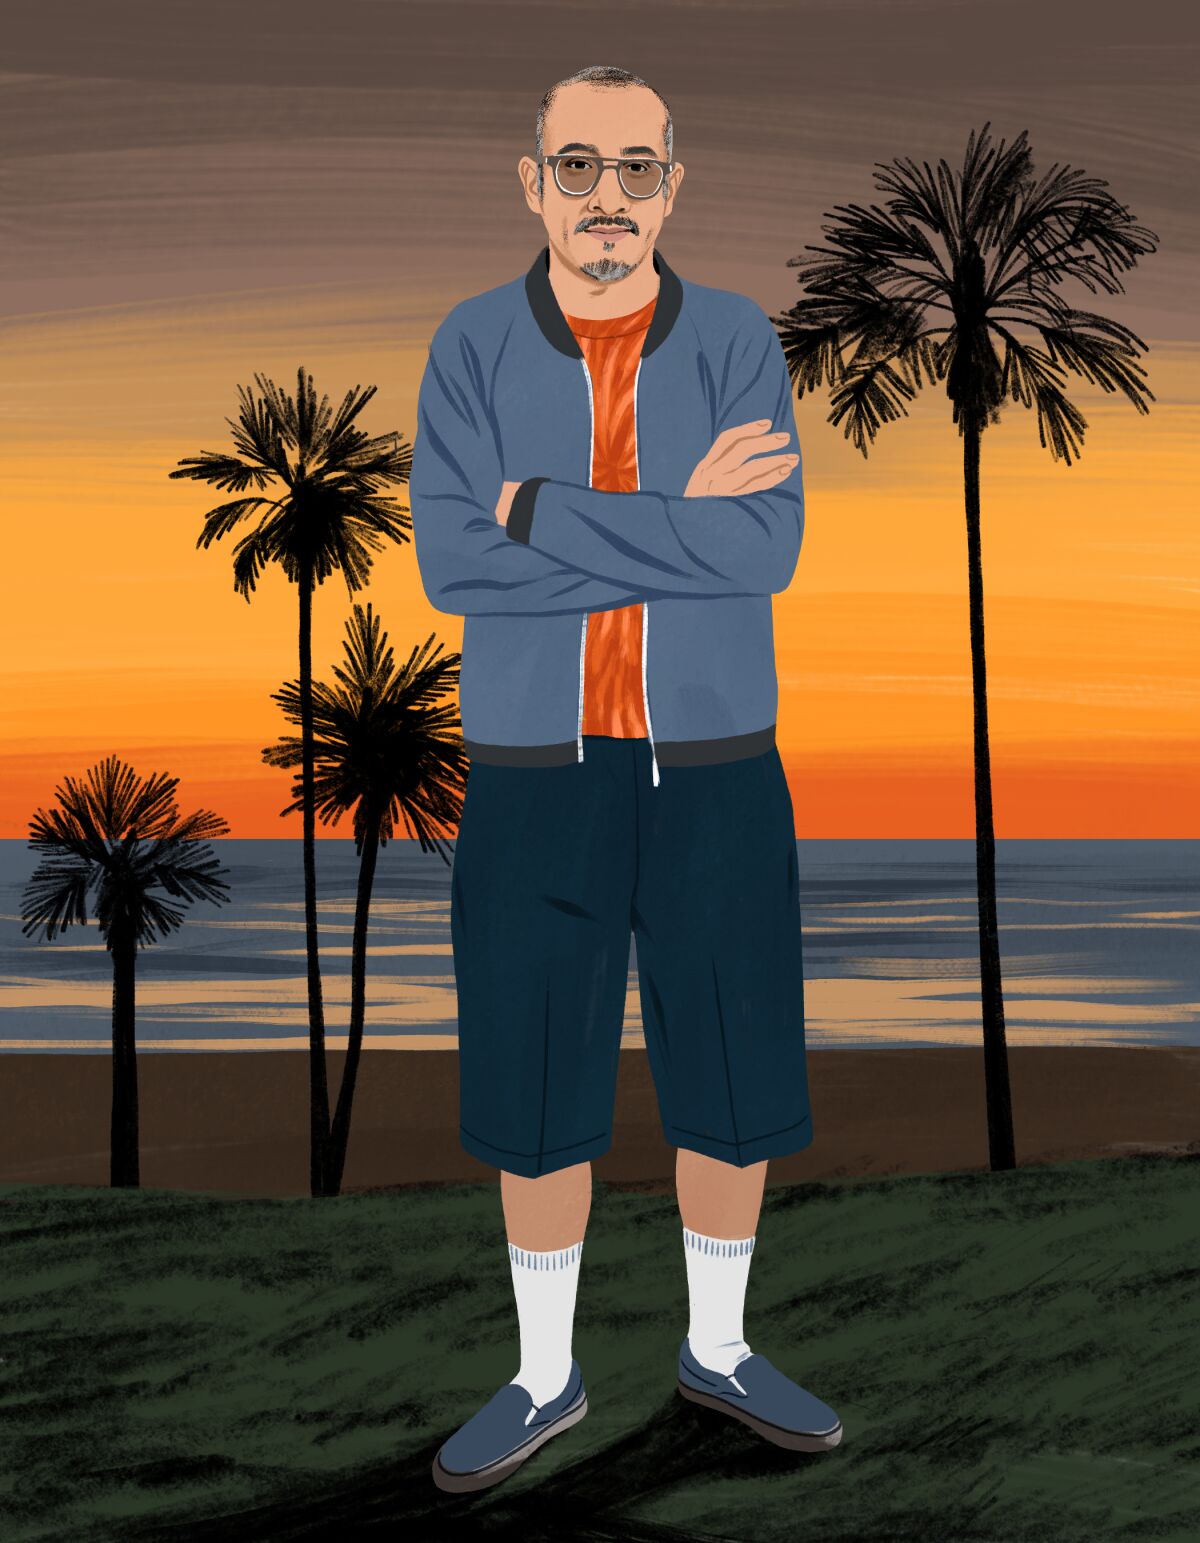 An illustration of a man wearing shorts and crew socks.